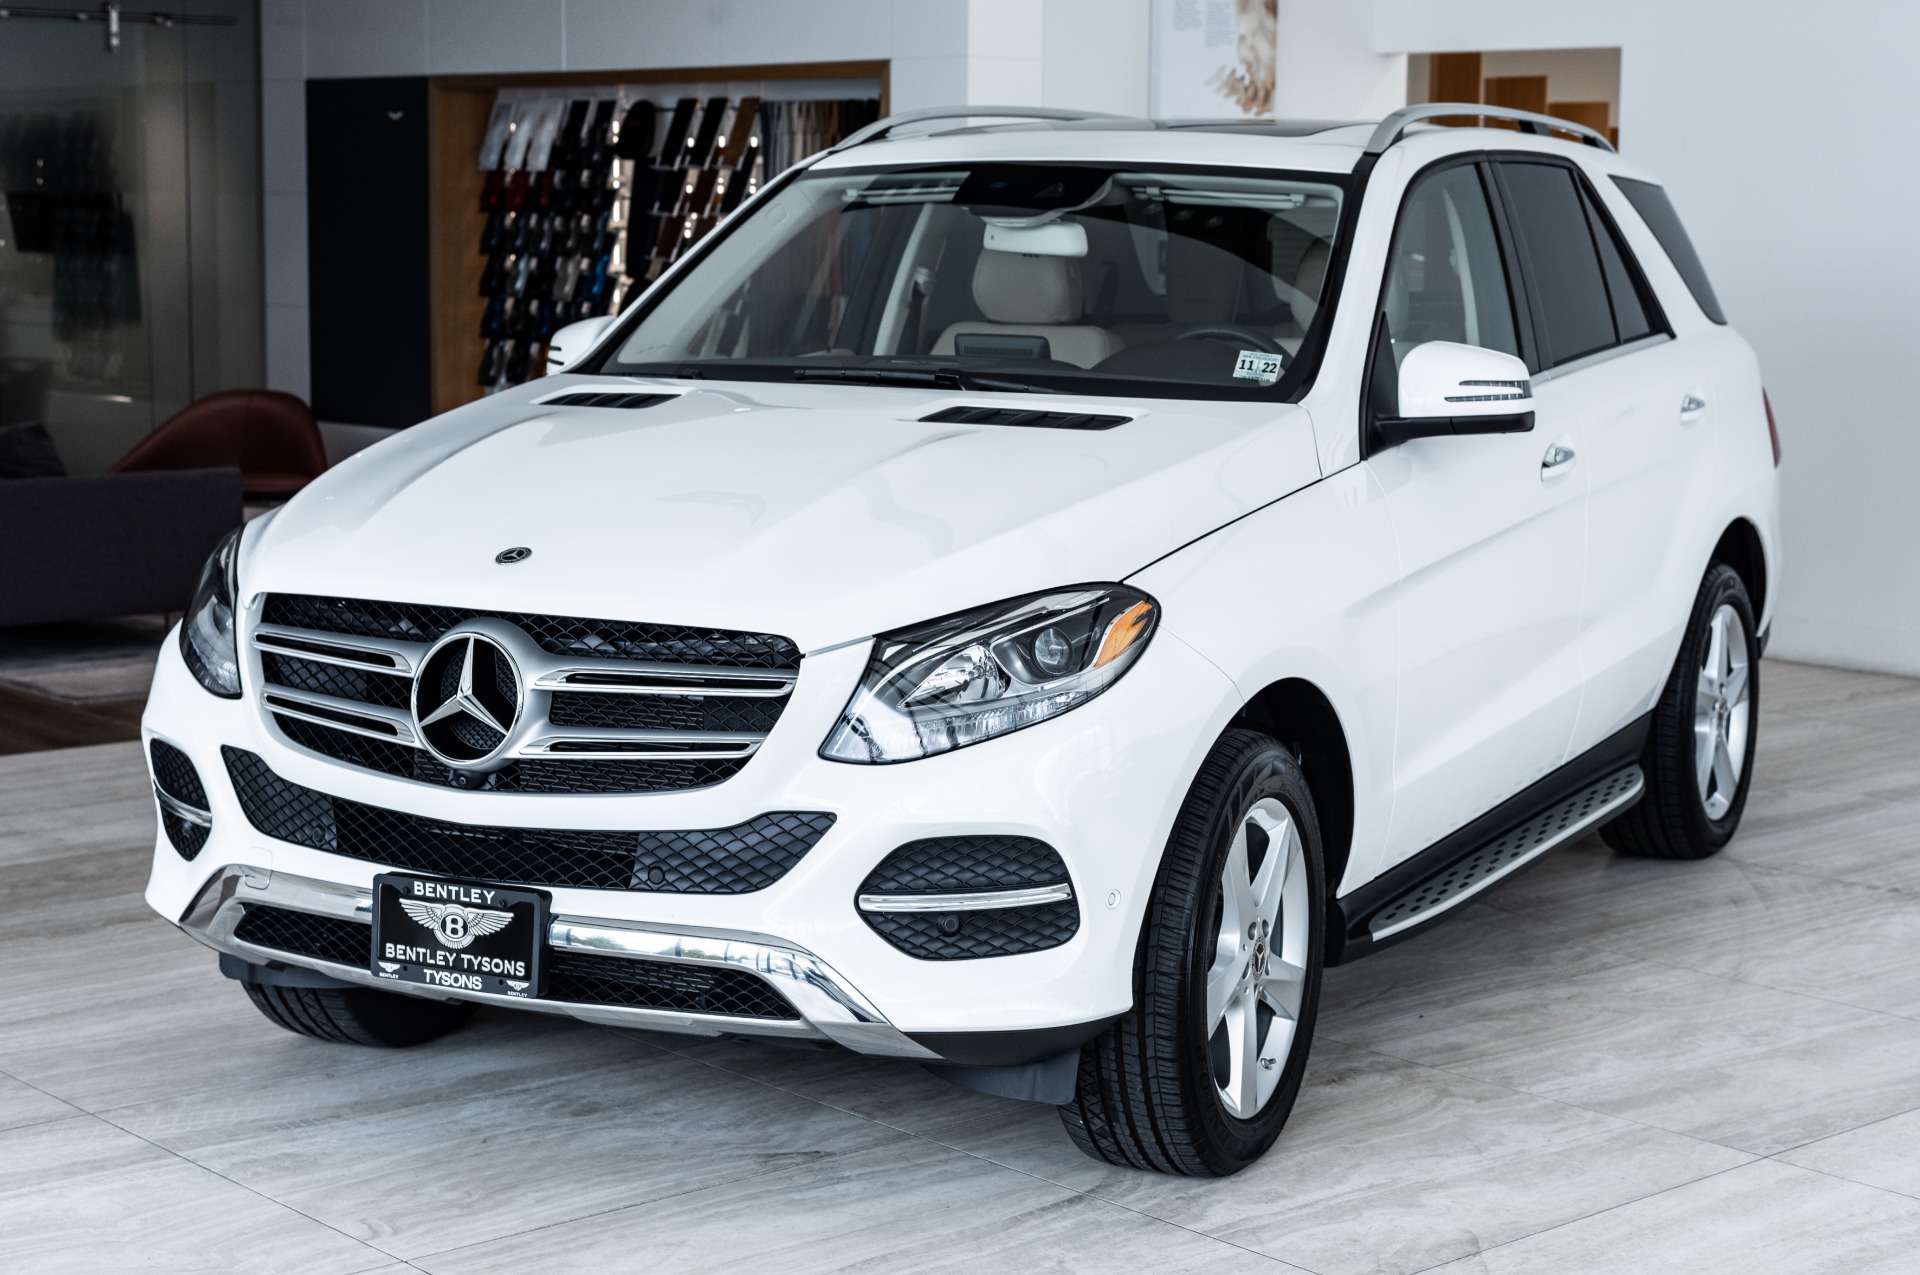 2018 Mercedes-Benz GLE GLE 350 4MATIC Stock # 8N070642A for sale near